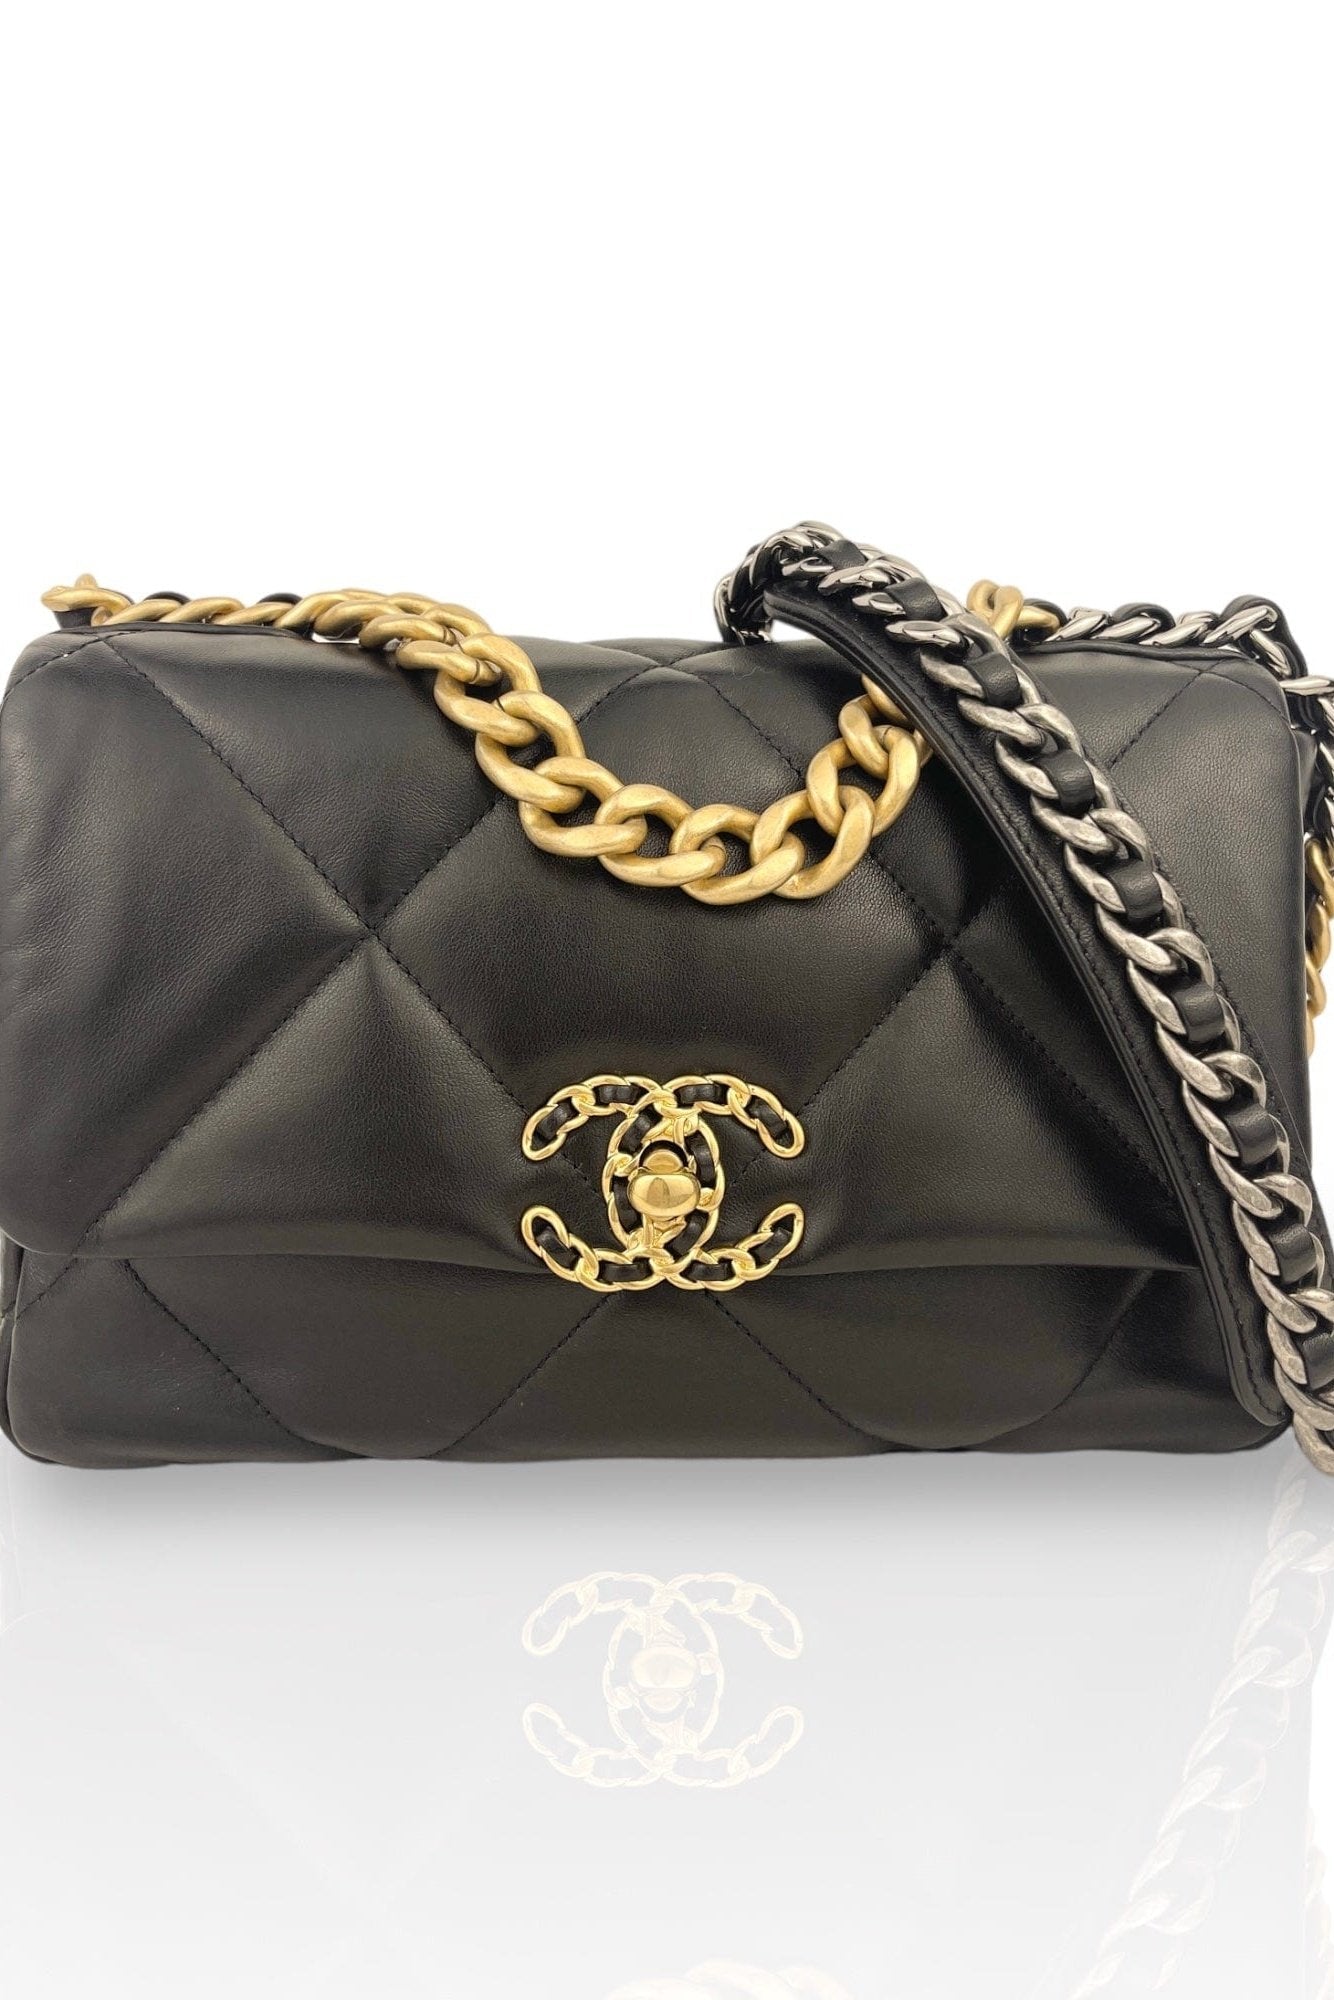 Chanel Large Classic Handbag in Black Grained Calfskin and Gold